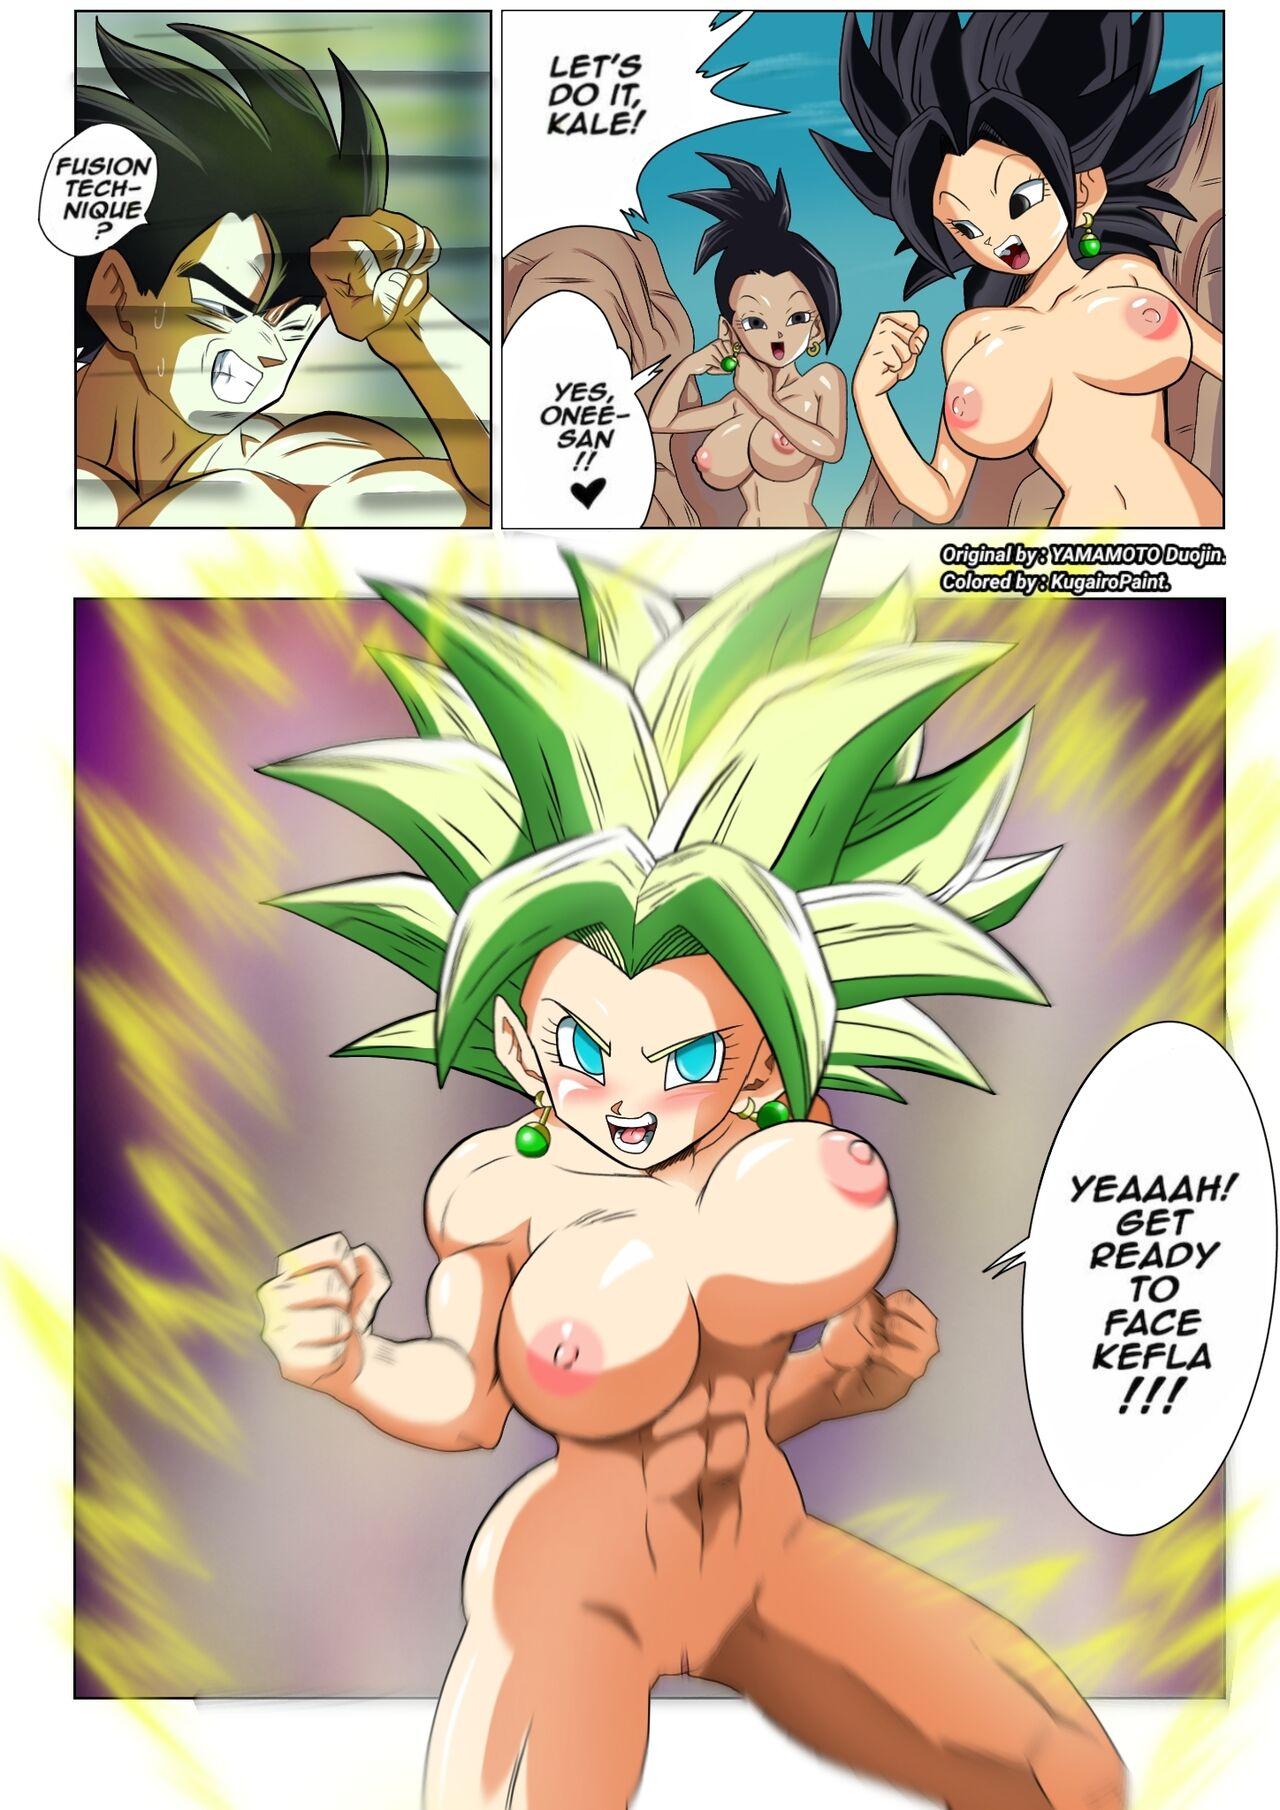 Full Movie Fight in the 6th Universe!! - Dragon ball super Wrestling - Page 9